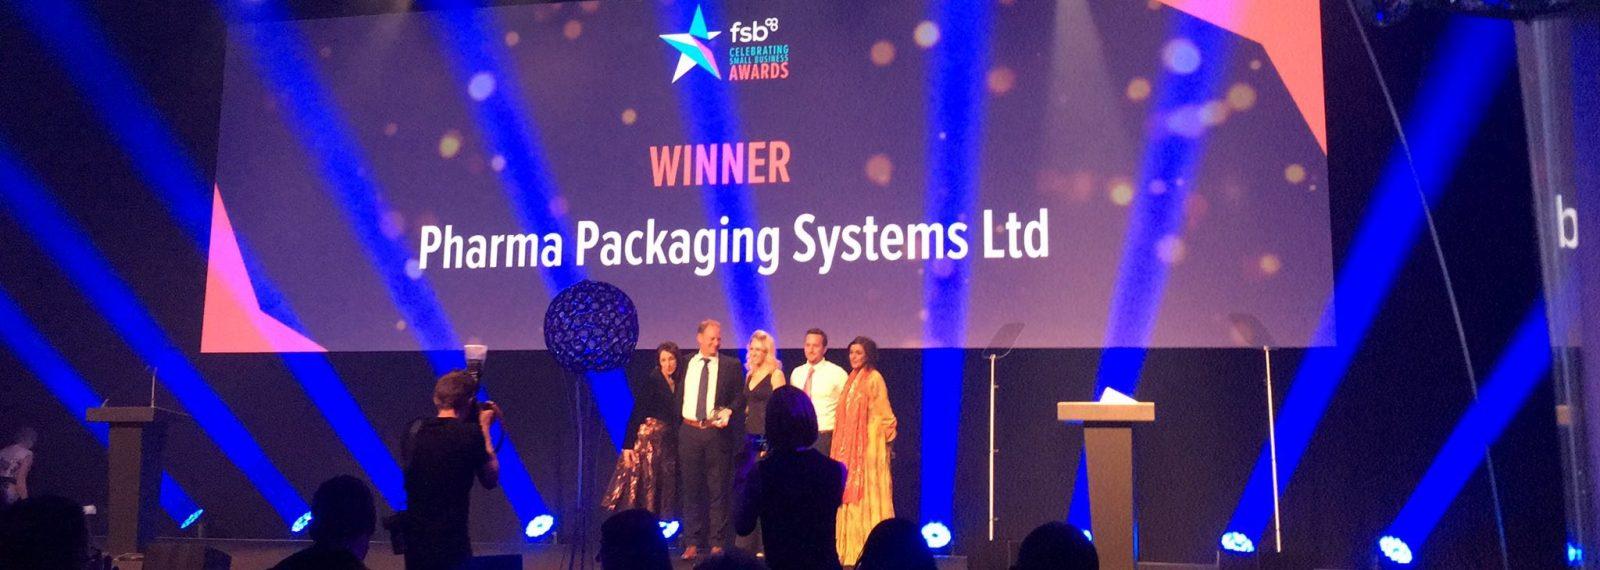 Product Business & Product Innovation Award - Pharma Packaging Systems image